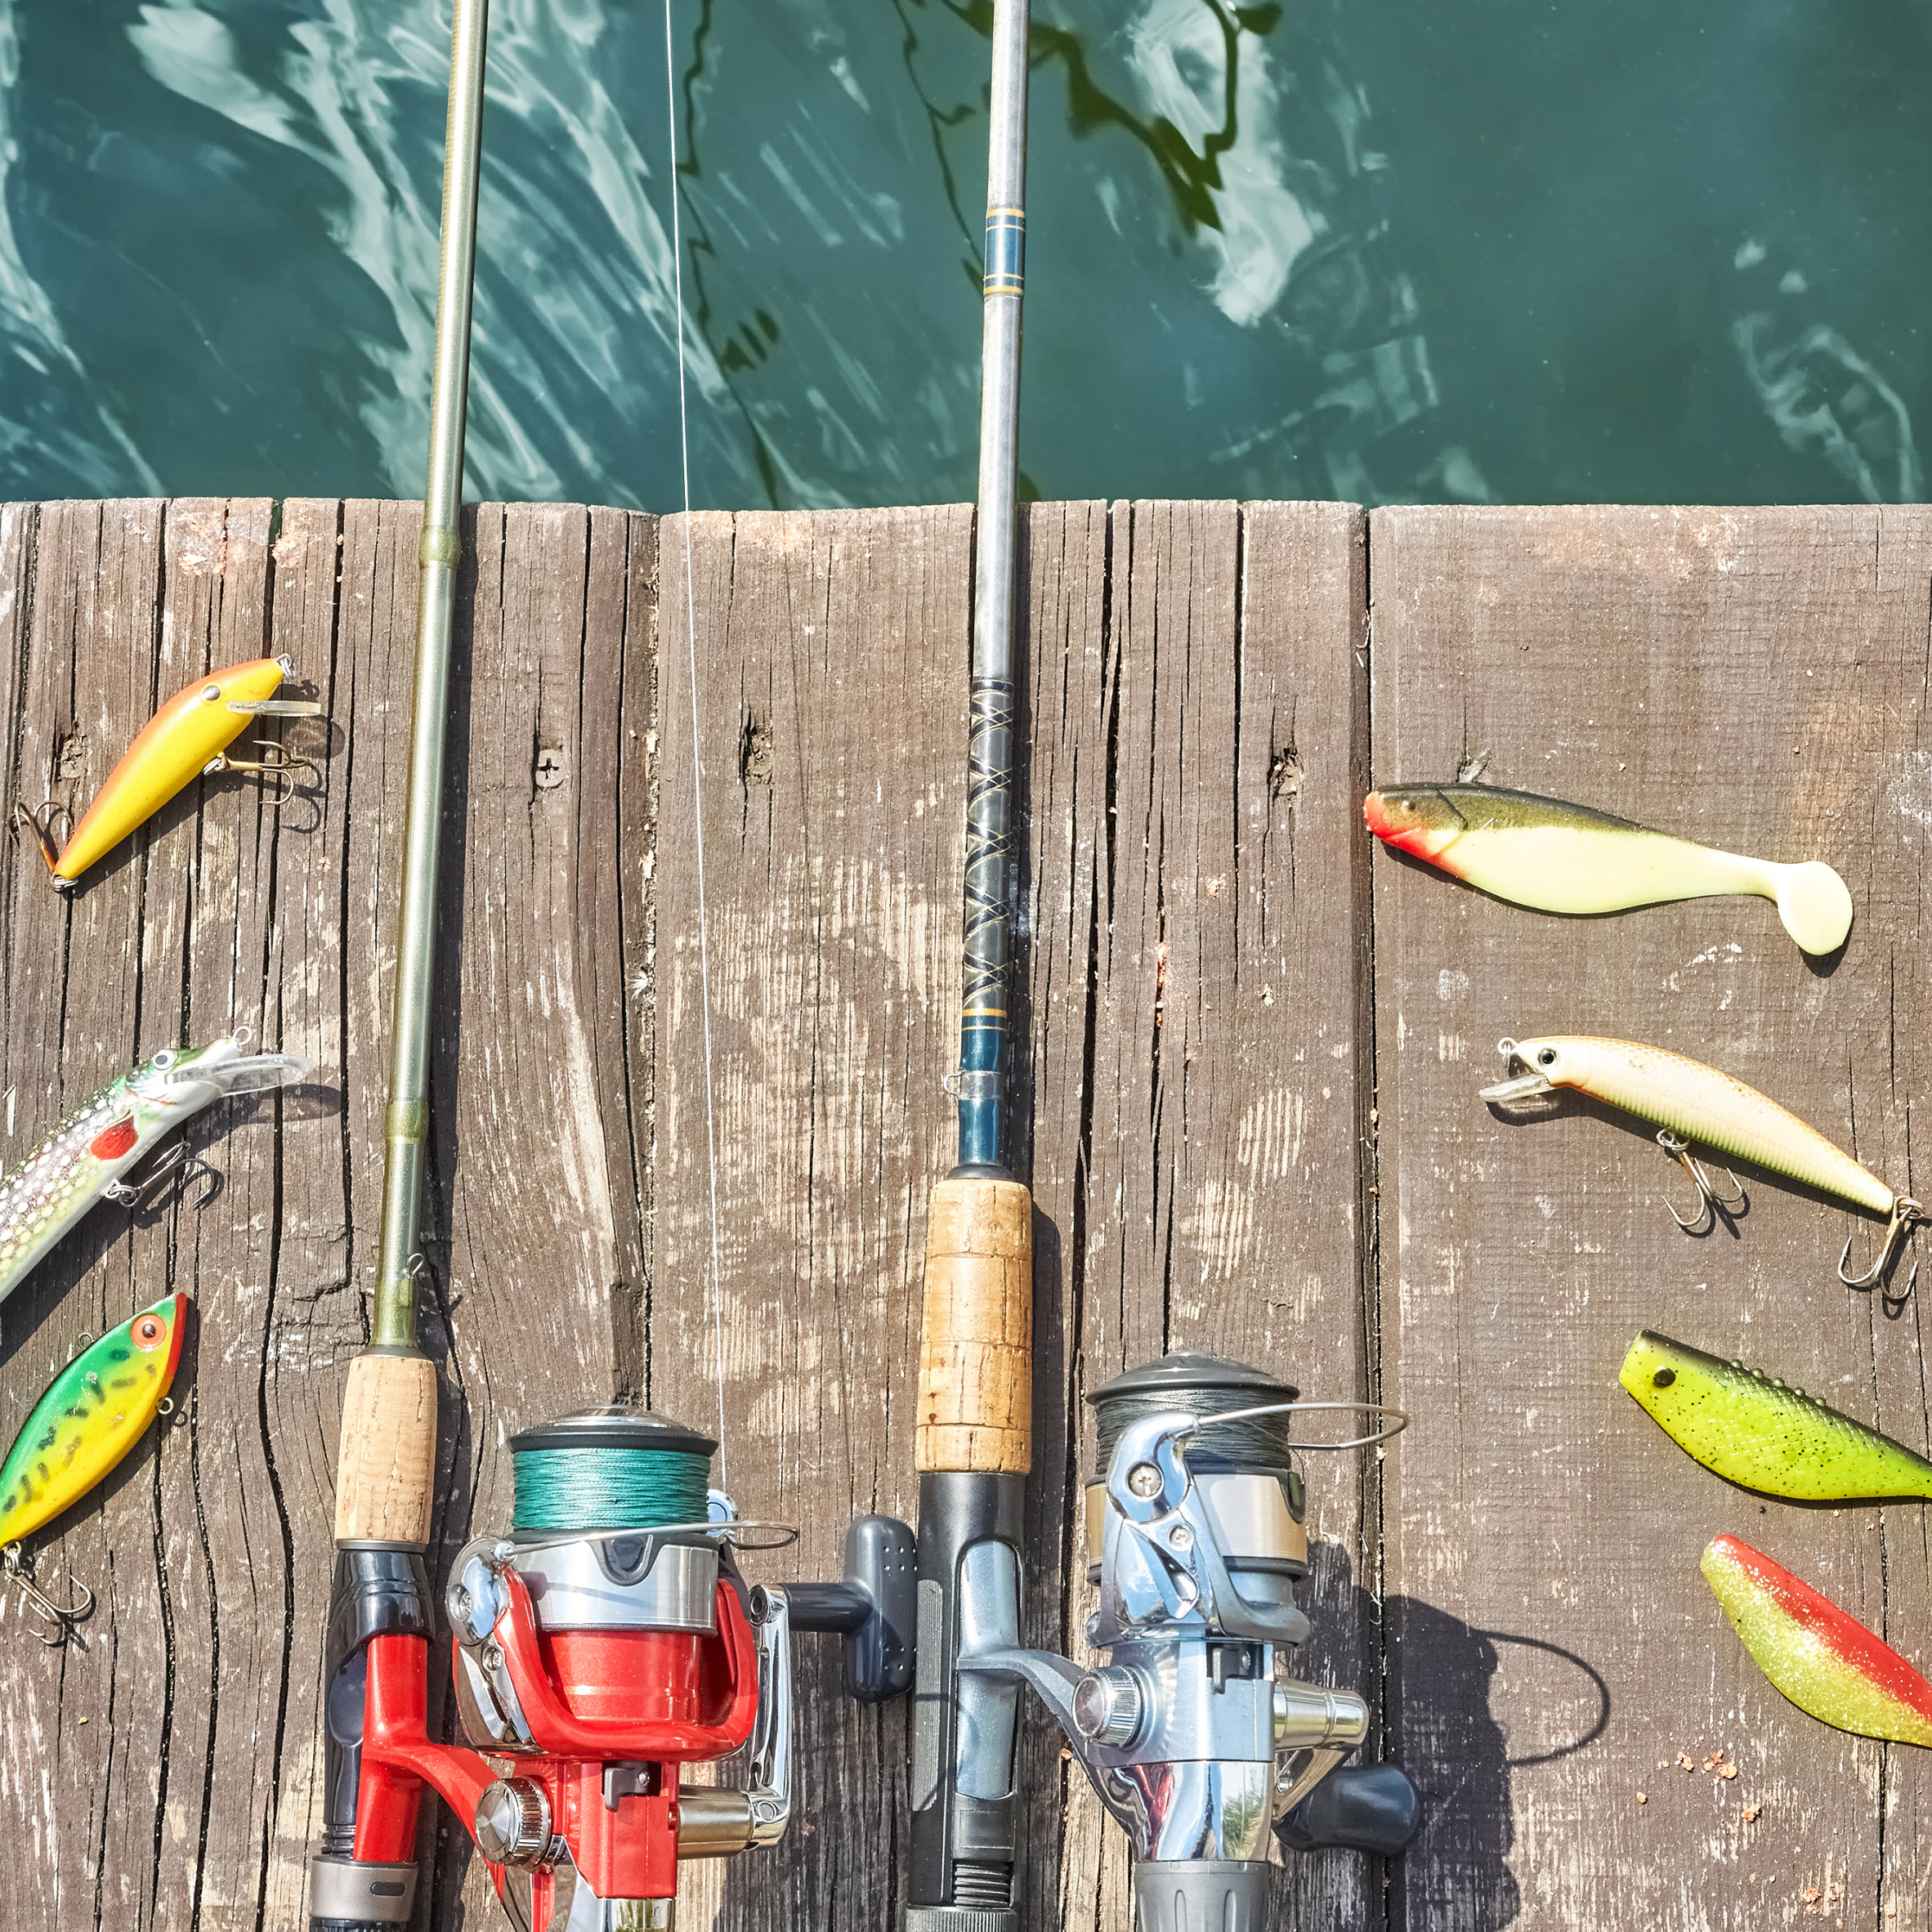 Trolling vs Bottom Fishing: What's the Difference?